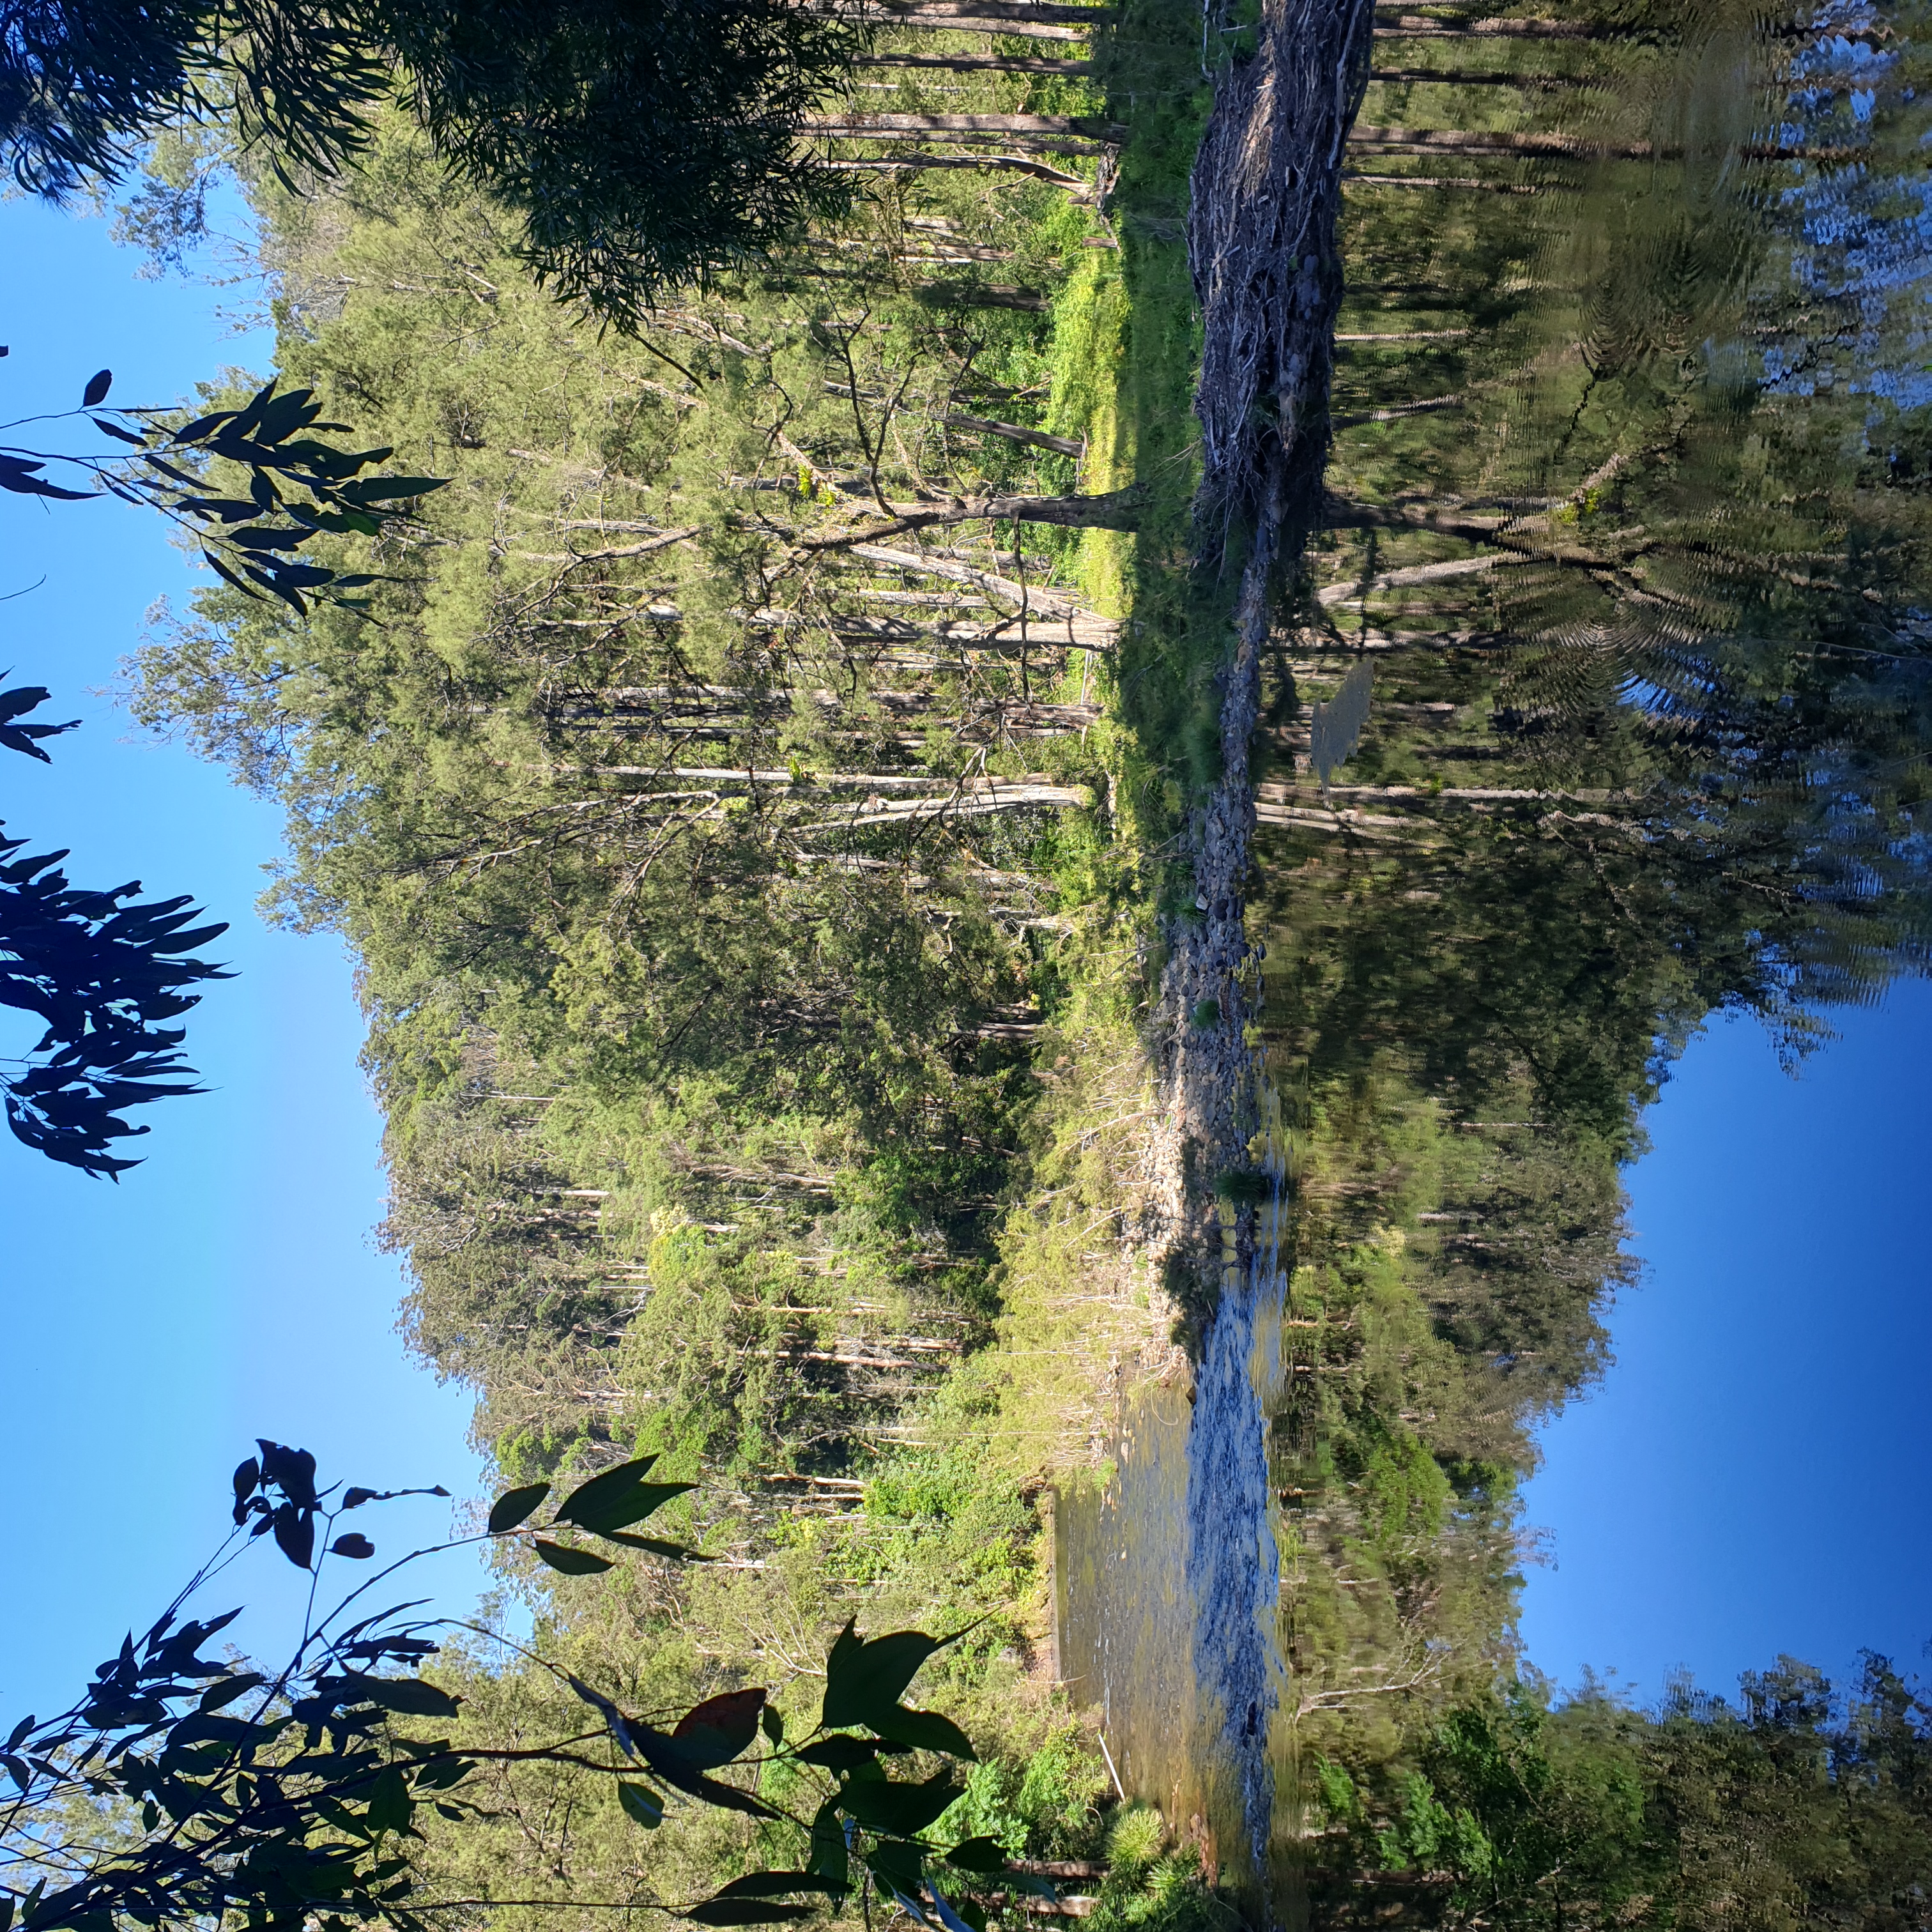 Once through the weeds, the last section of the walk gives access to many pleasant reaches on the Bellingen River 